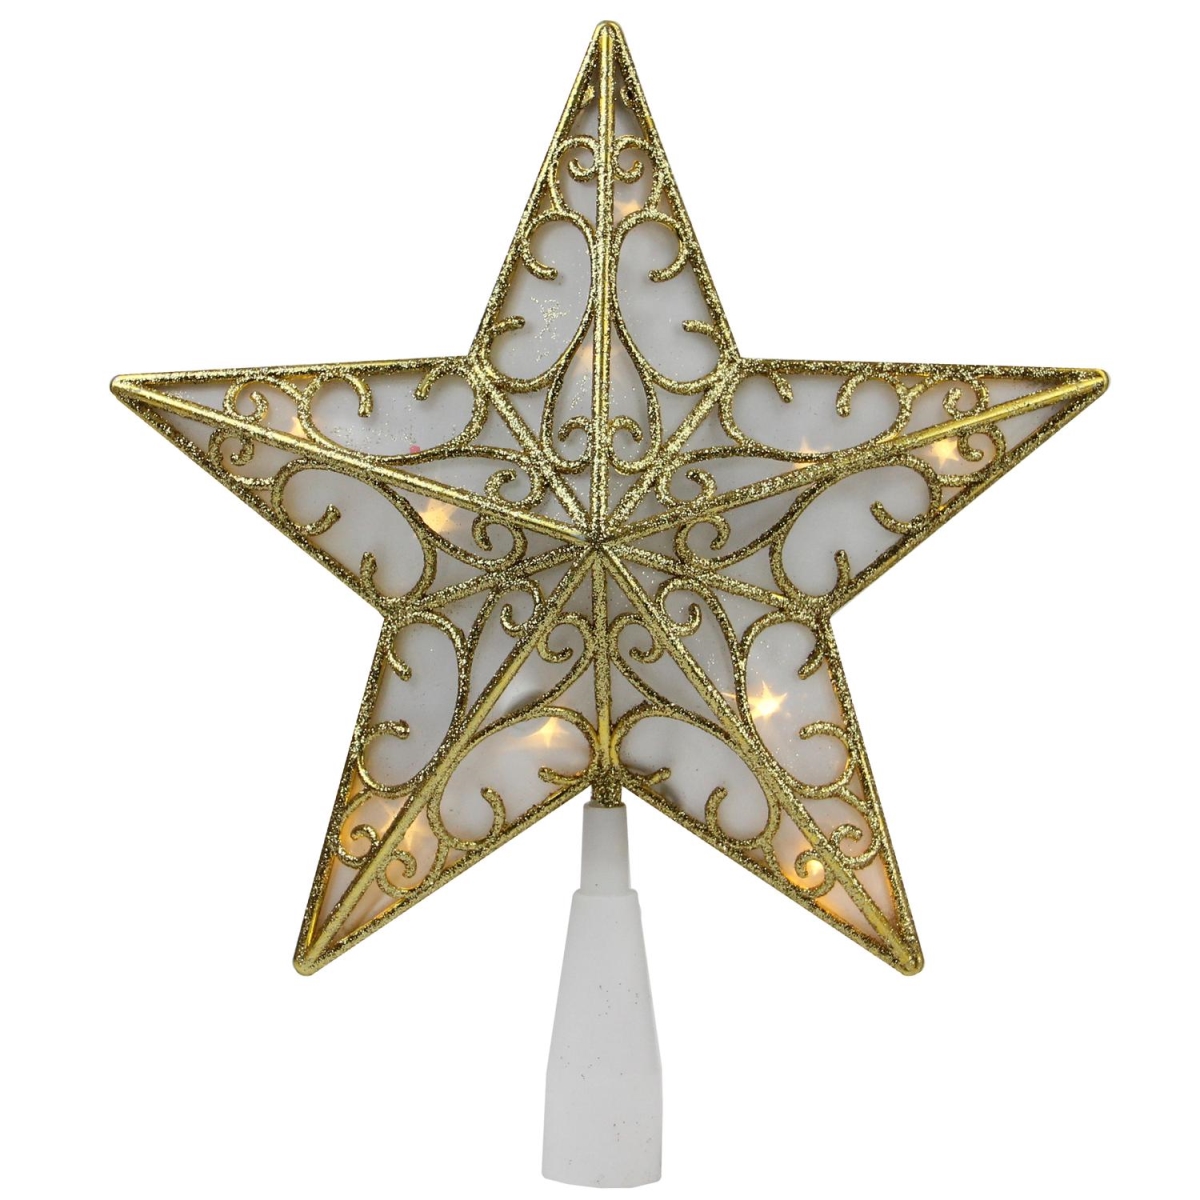 Picture of Northlight 32606350 9 in. Gold Glitter Star LED Christmas Tree Topper - Warm White Lights